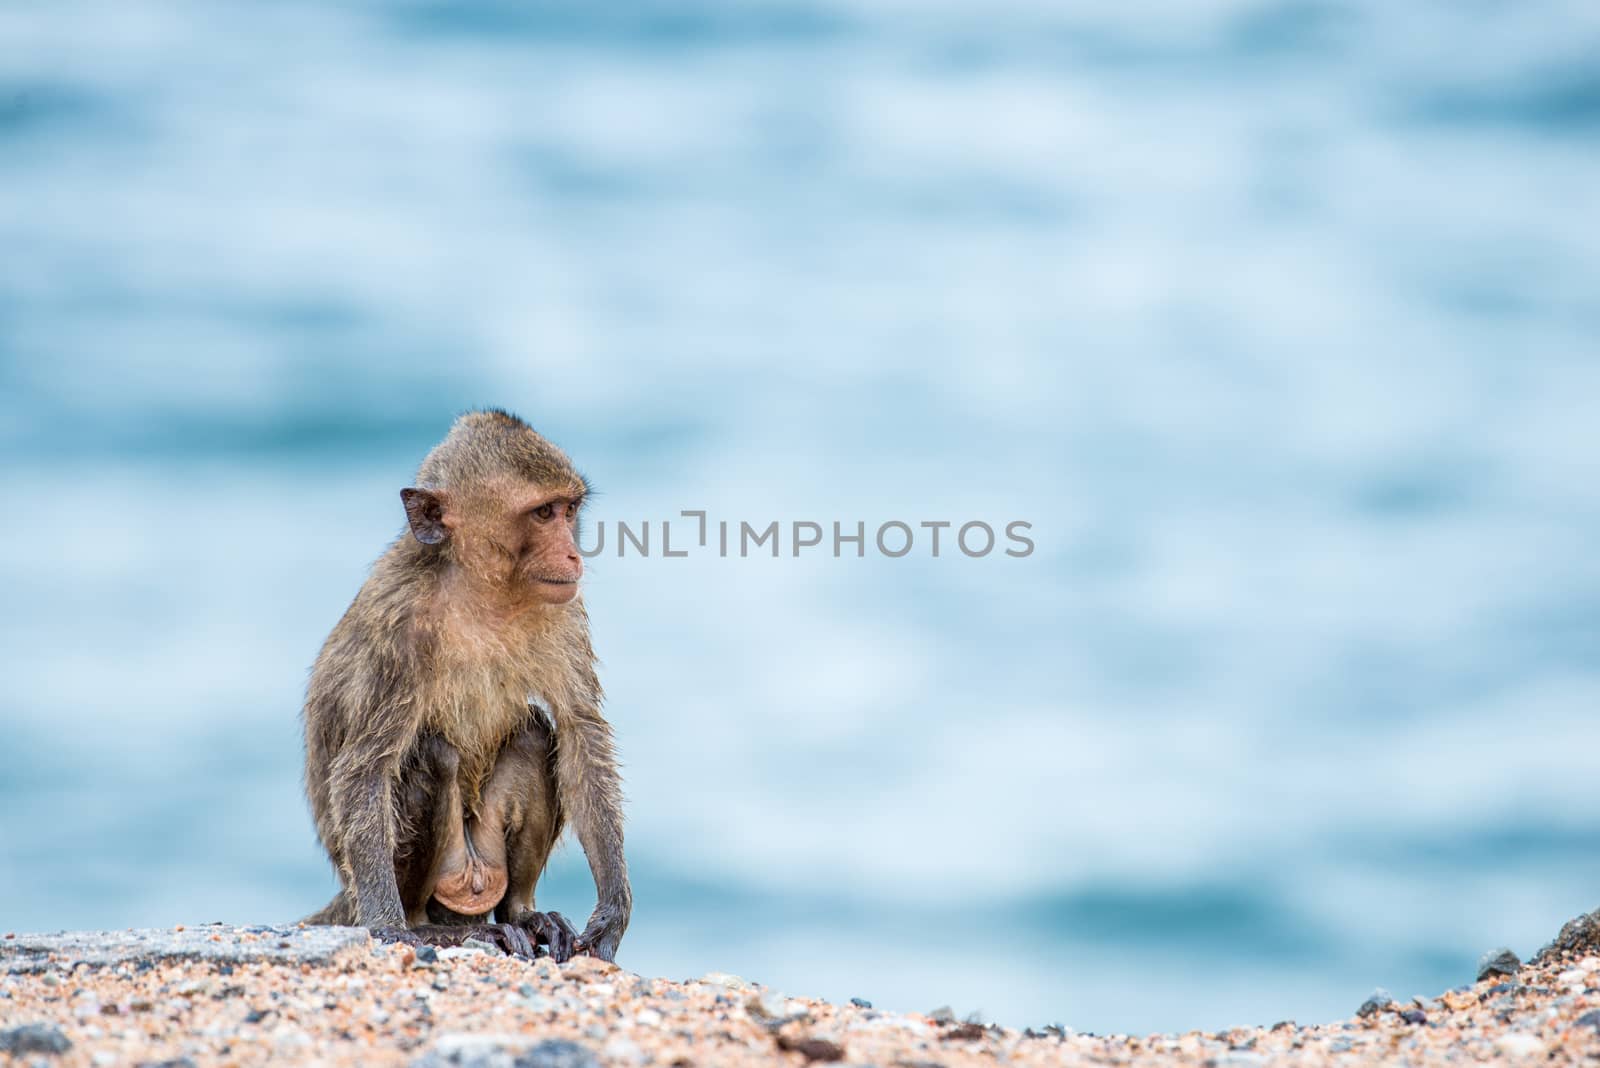 monkey sitting on the sand with sea background